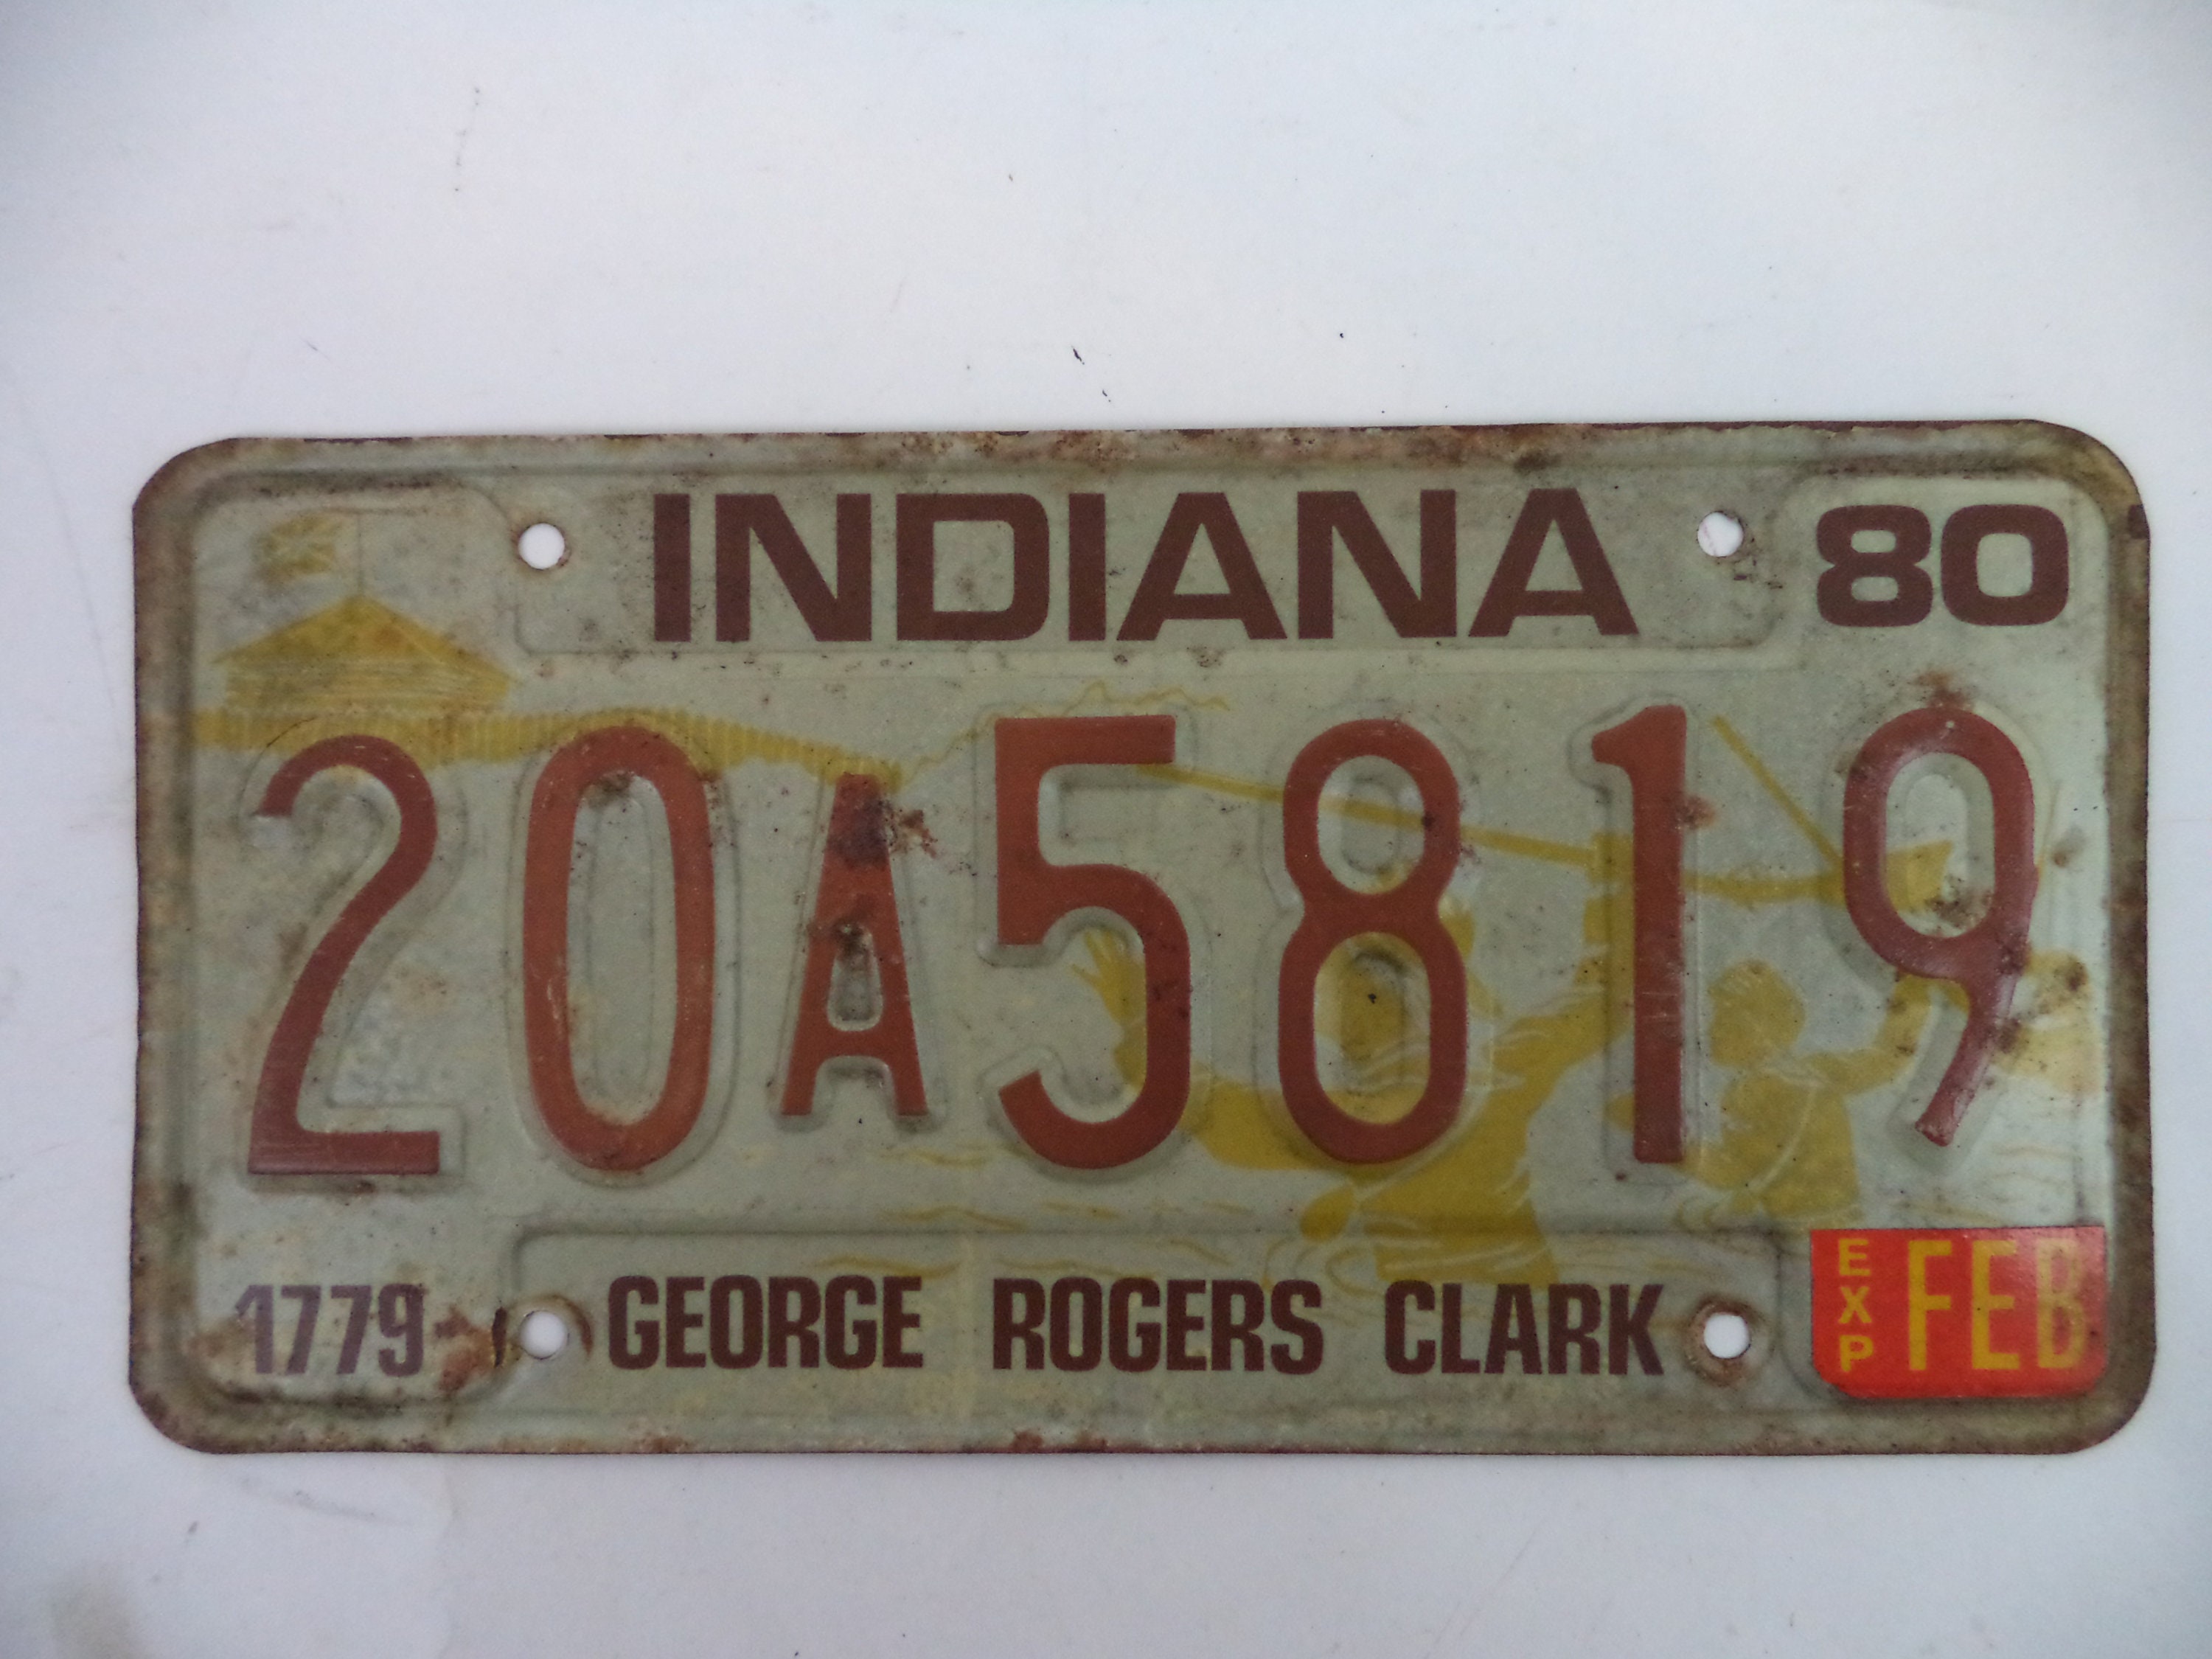 Vintage Indiana License Plate 1980 Car 20a5819 George Rogers Etsy